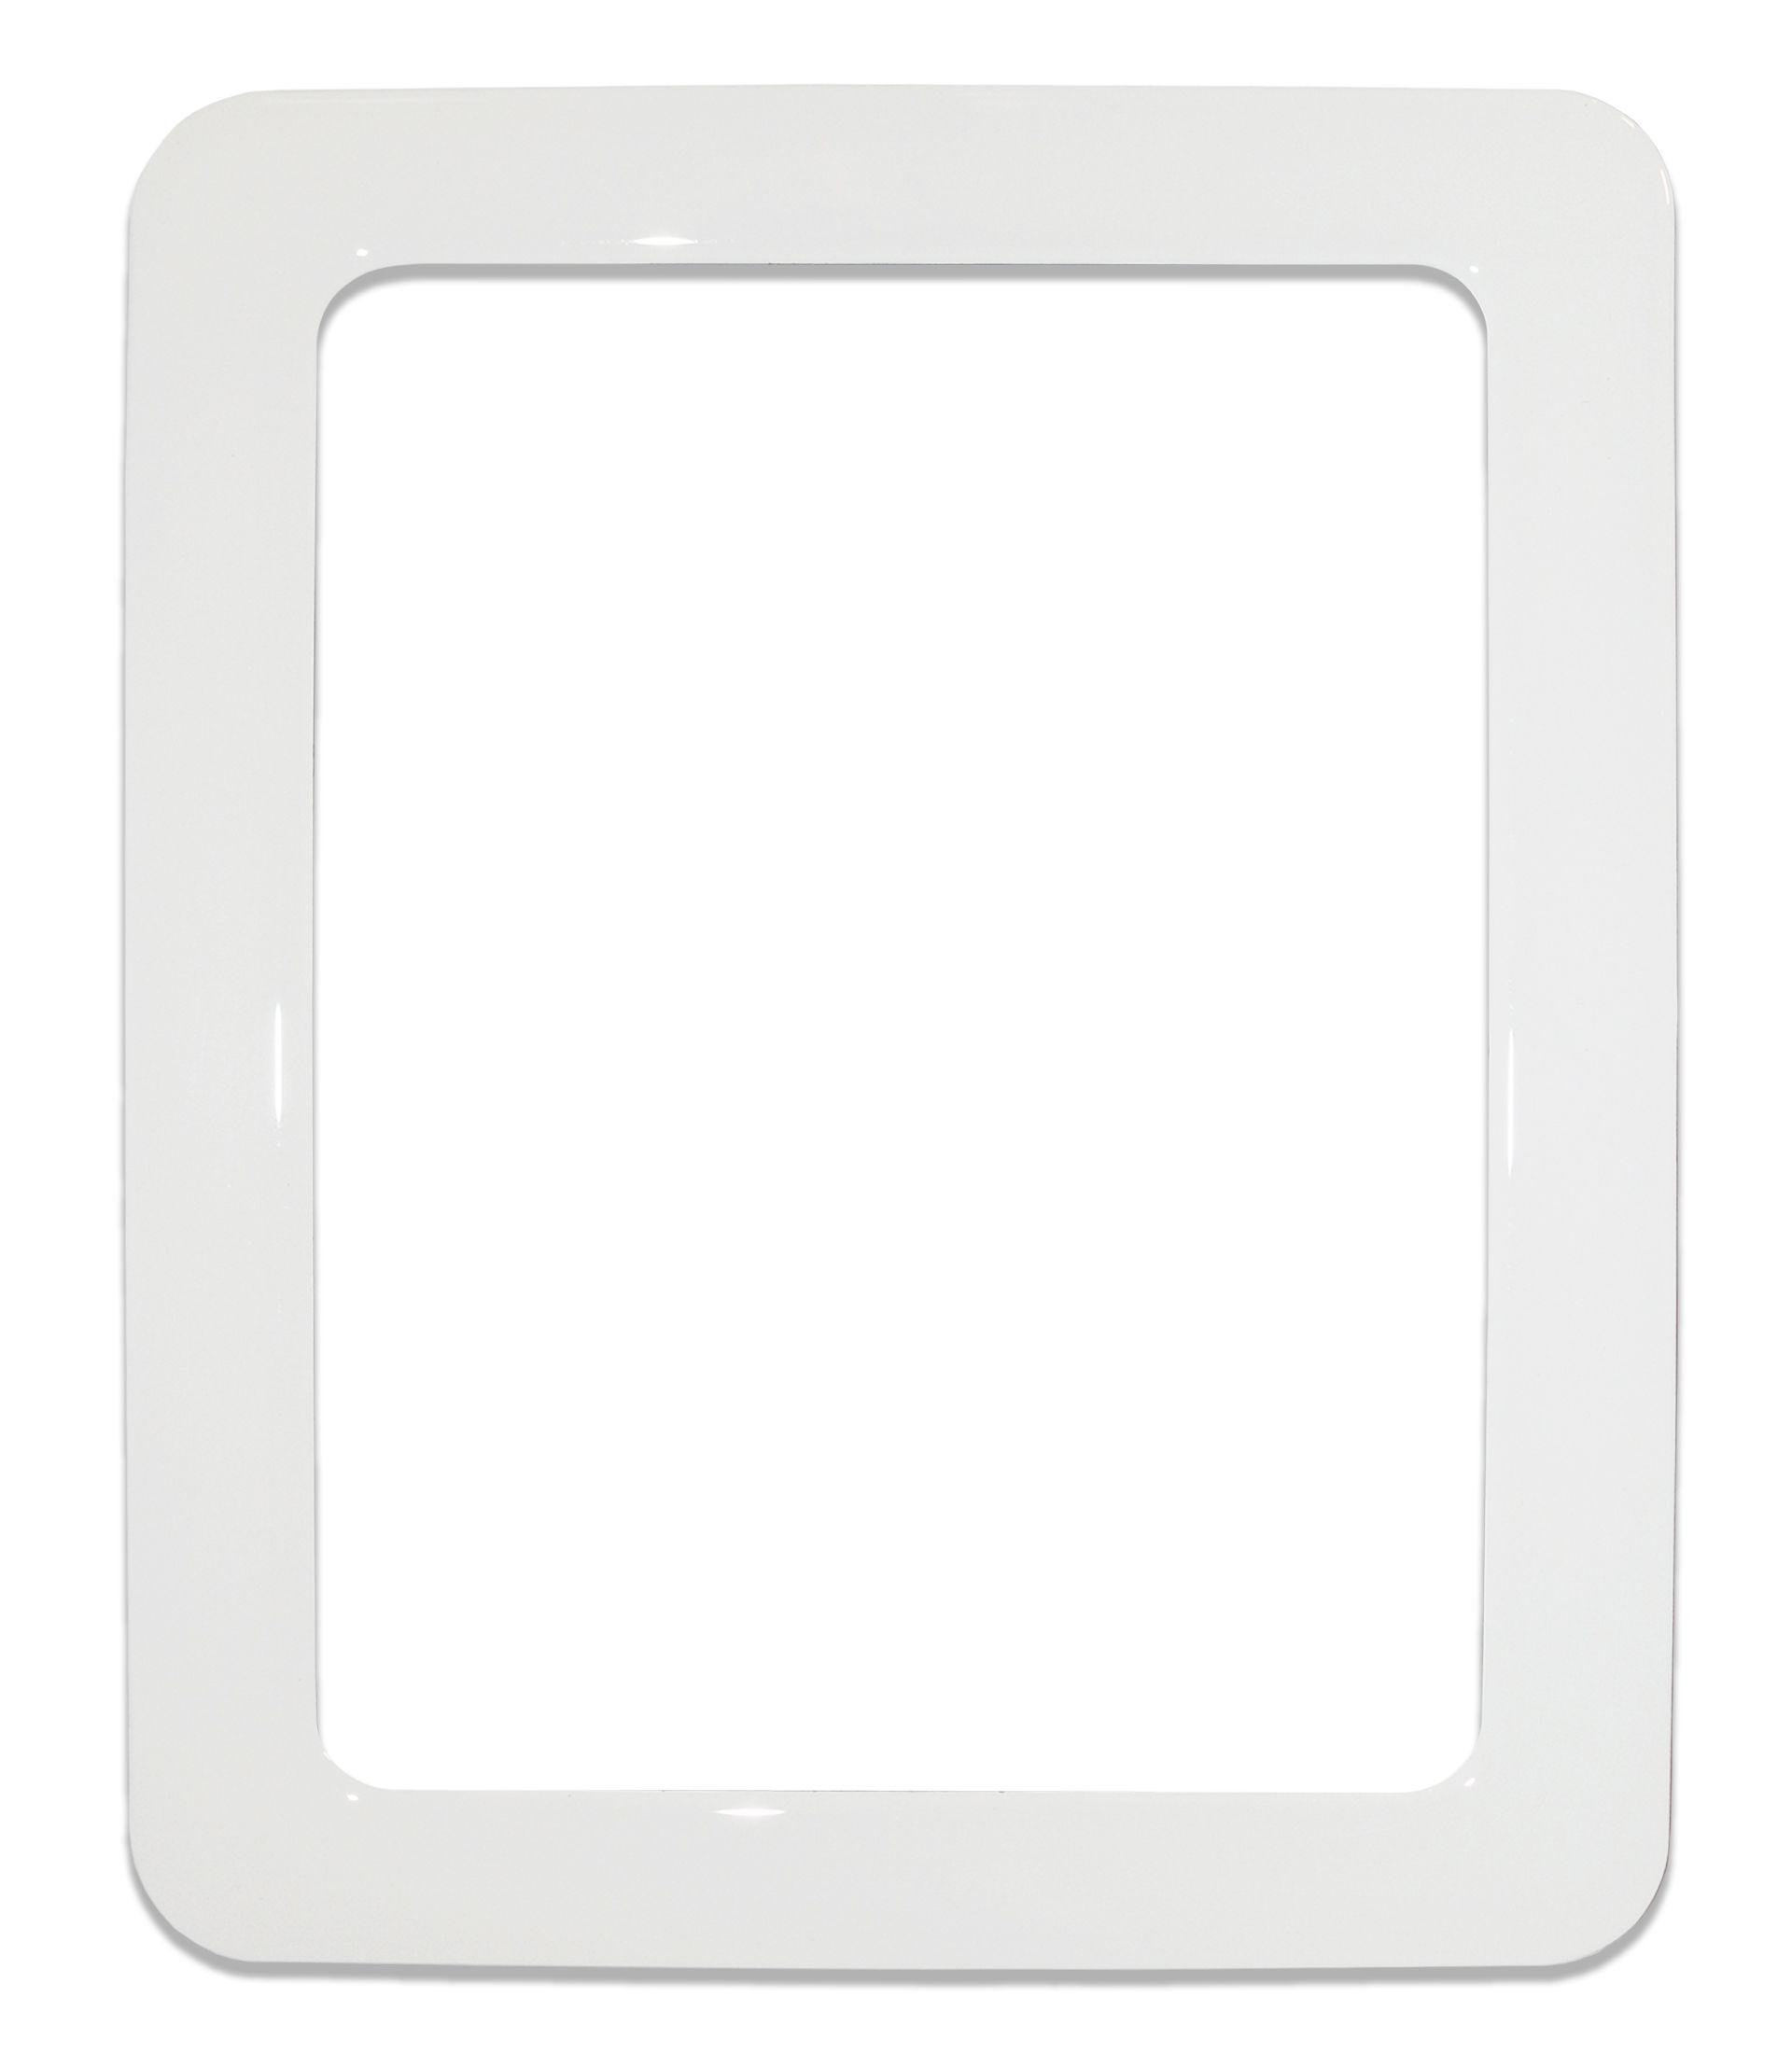 Magnetic self-adhesive frame size 19.0 x 23.8 cm - white